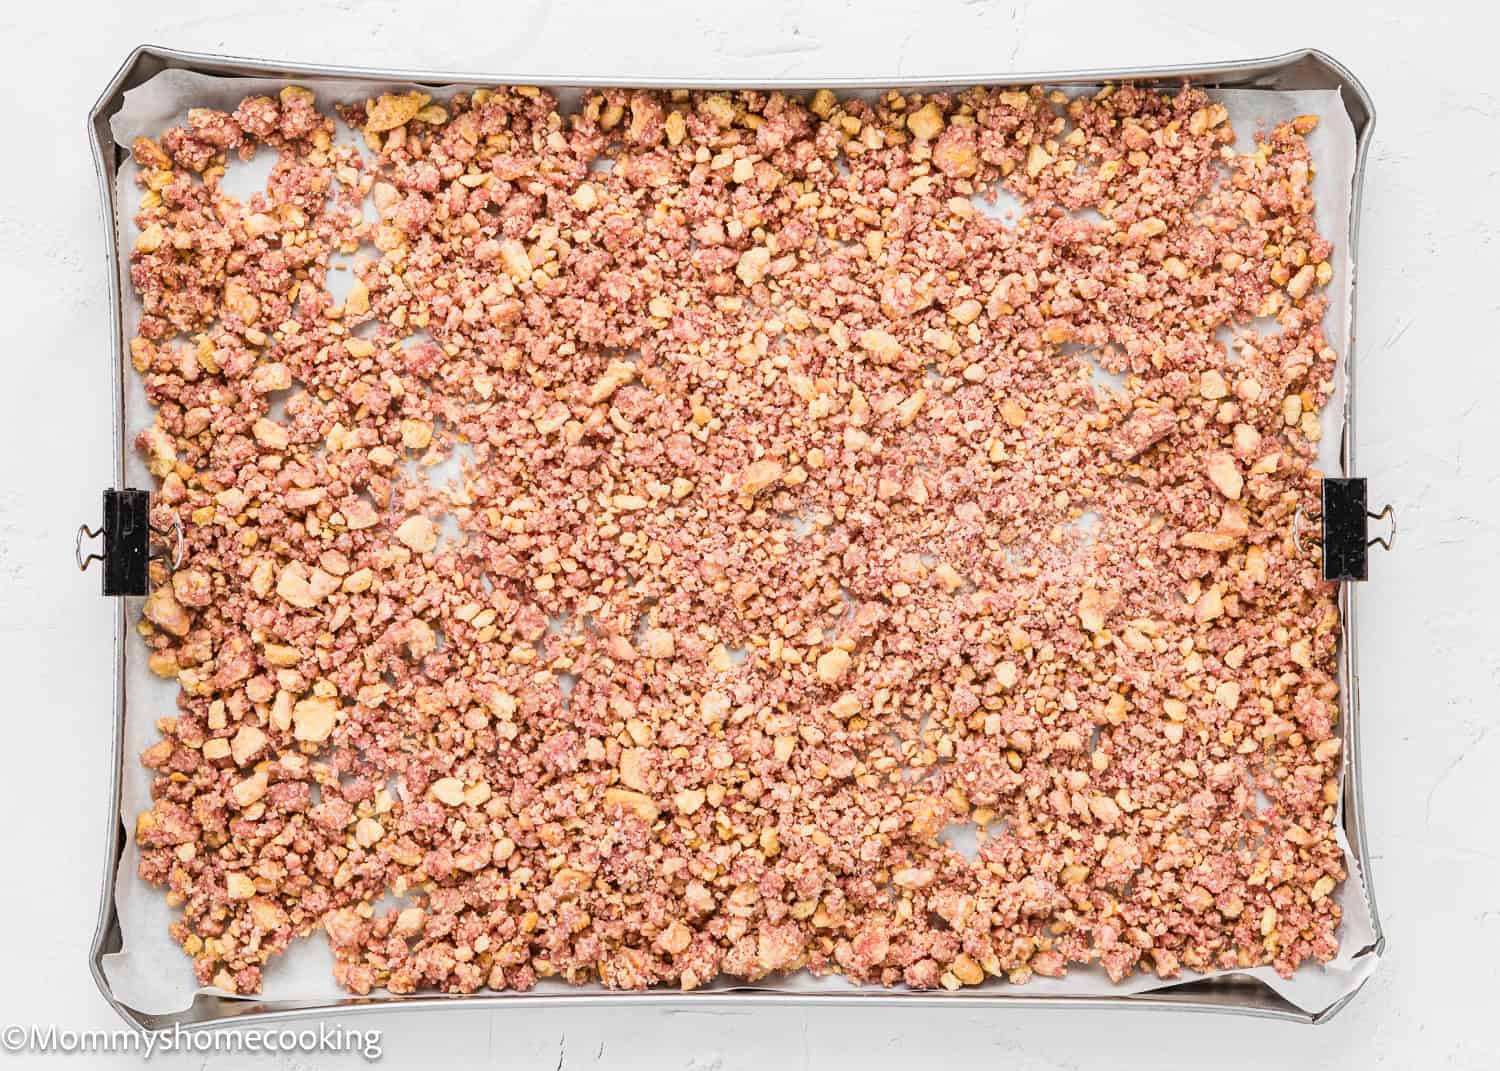 unbaked Strawberry Crunch dessert topping in a baking tray.